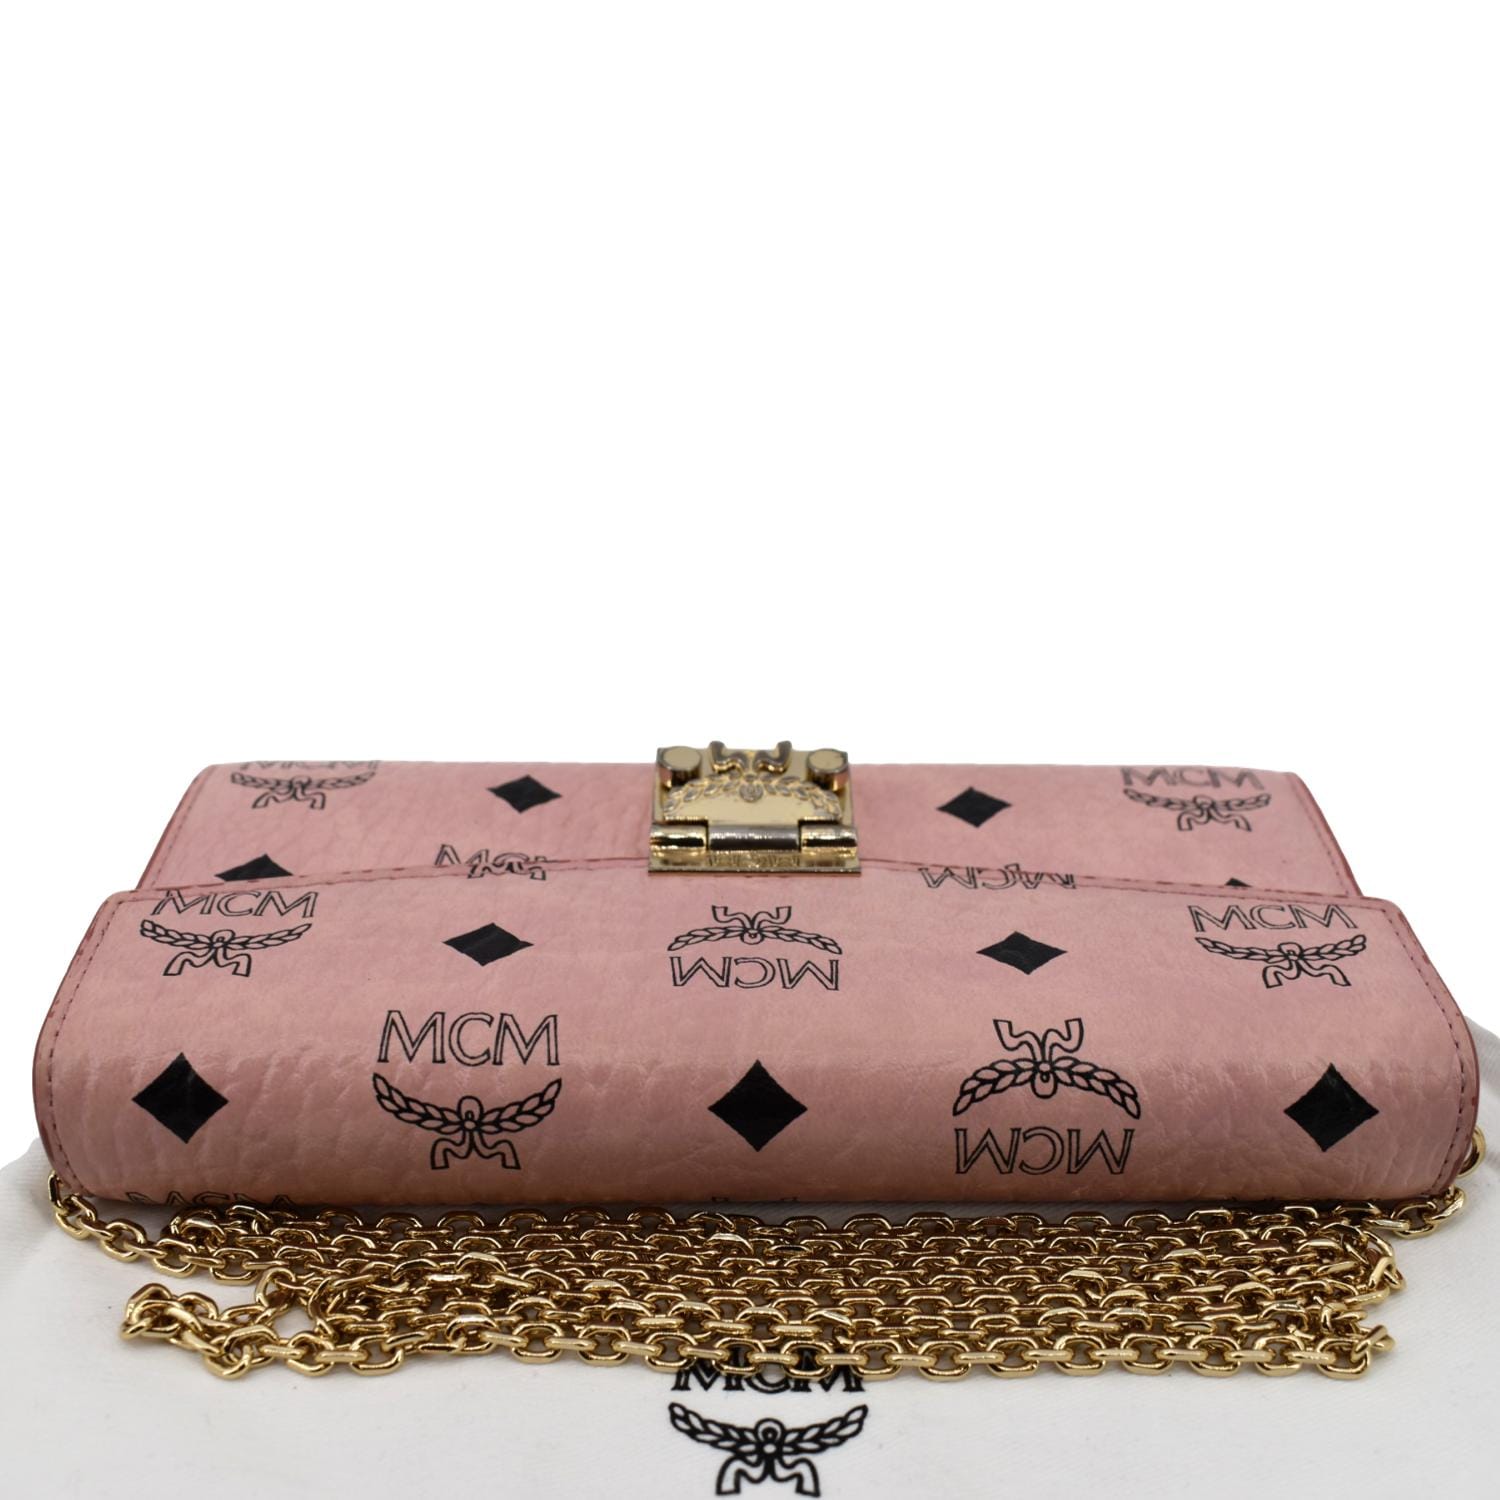 MCM Large Patricia Visetos Canvas Wallet On Chain Bag Soft Pink